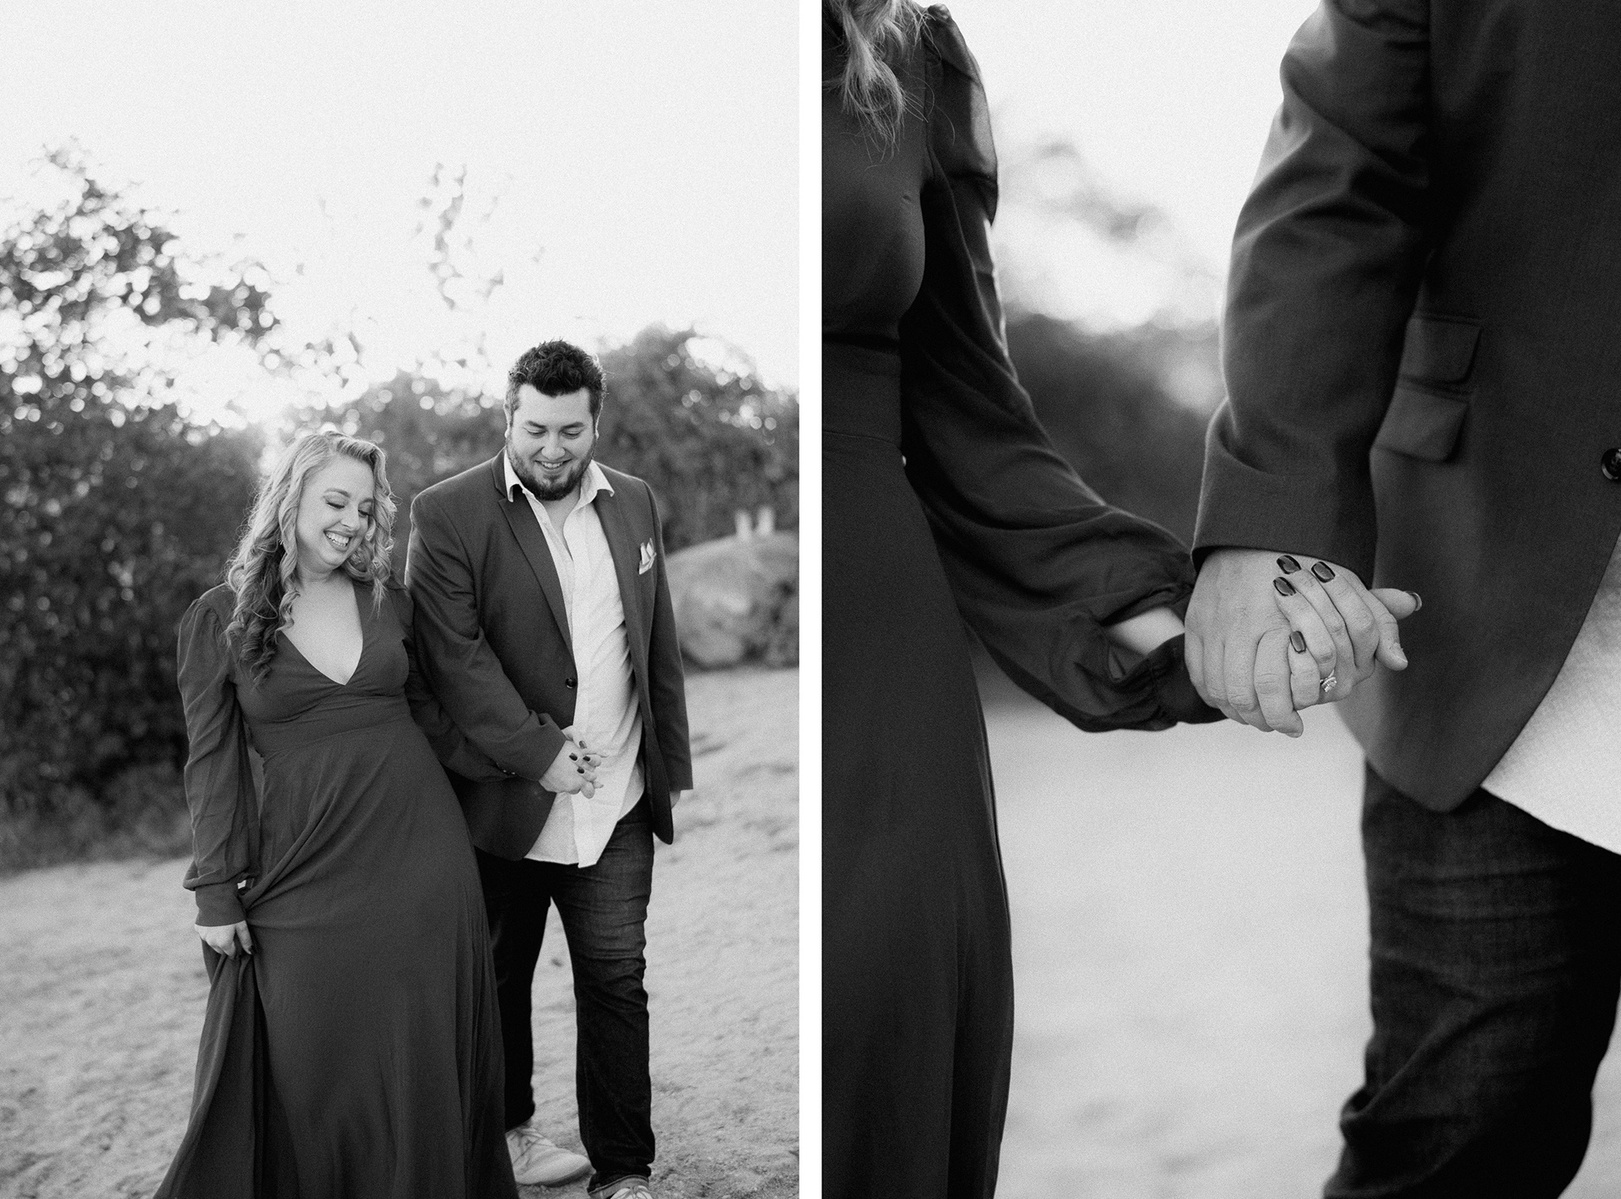 Black and white diptych of engaged couple holding hands.